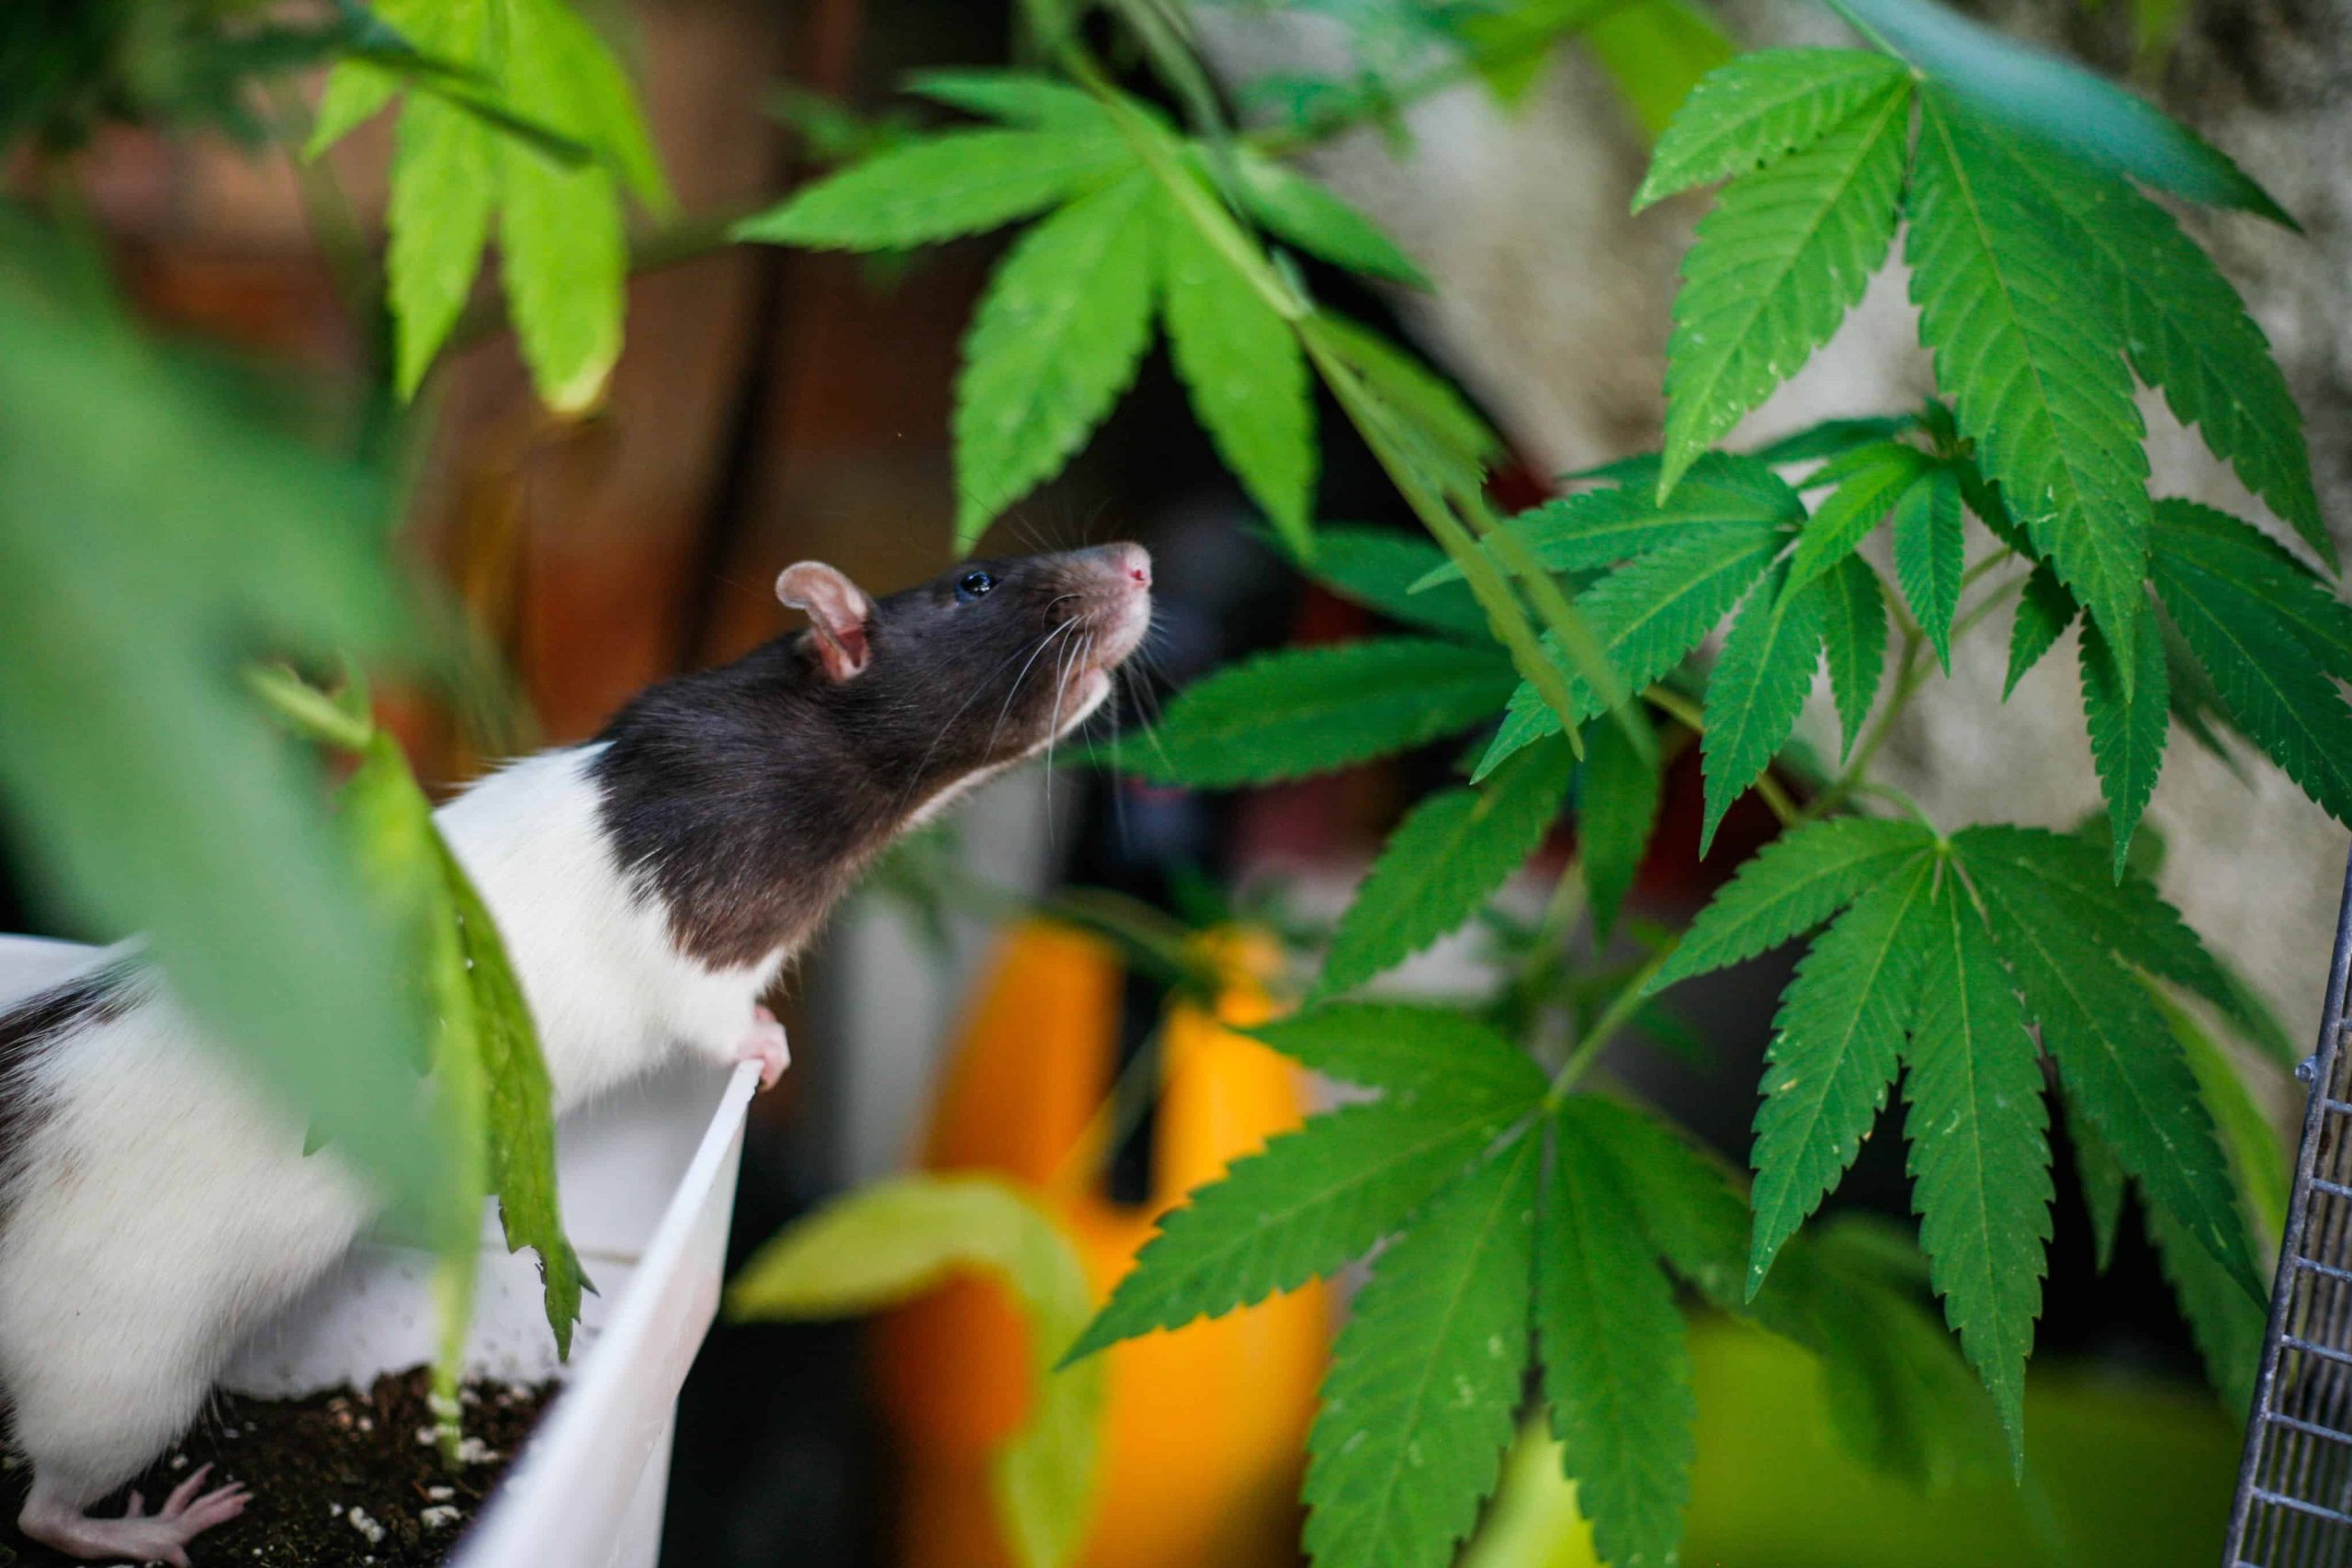 Police in India Say Rats Ate More Than 1,100 Pounds of Confiscated Weed